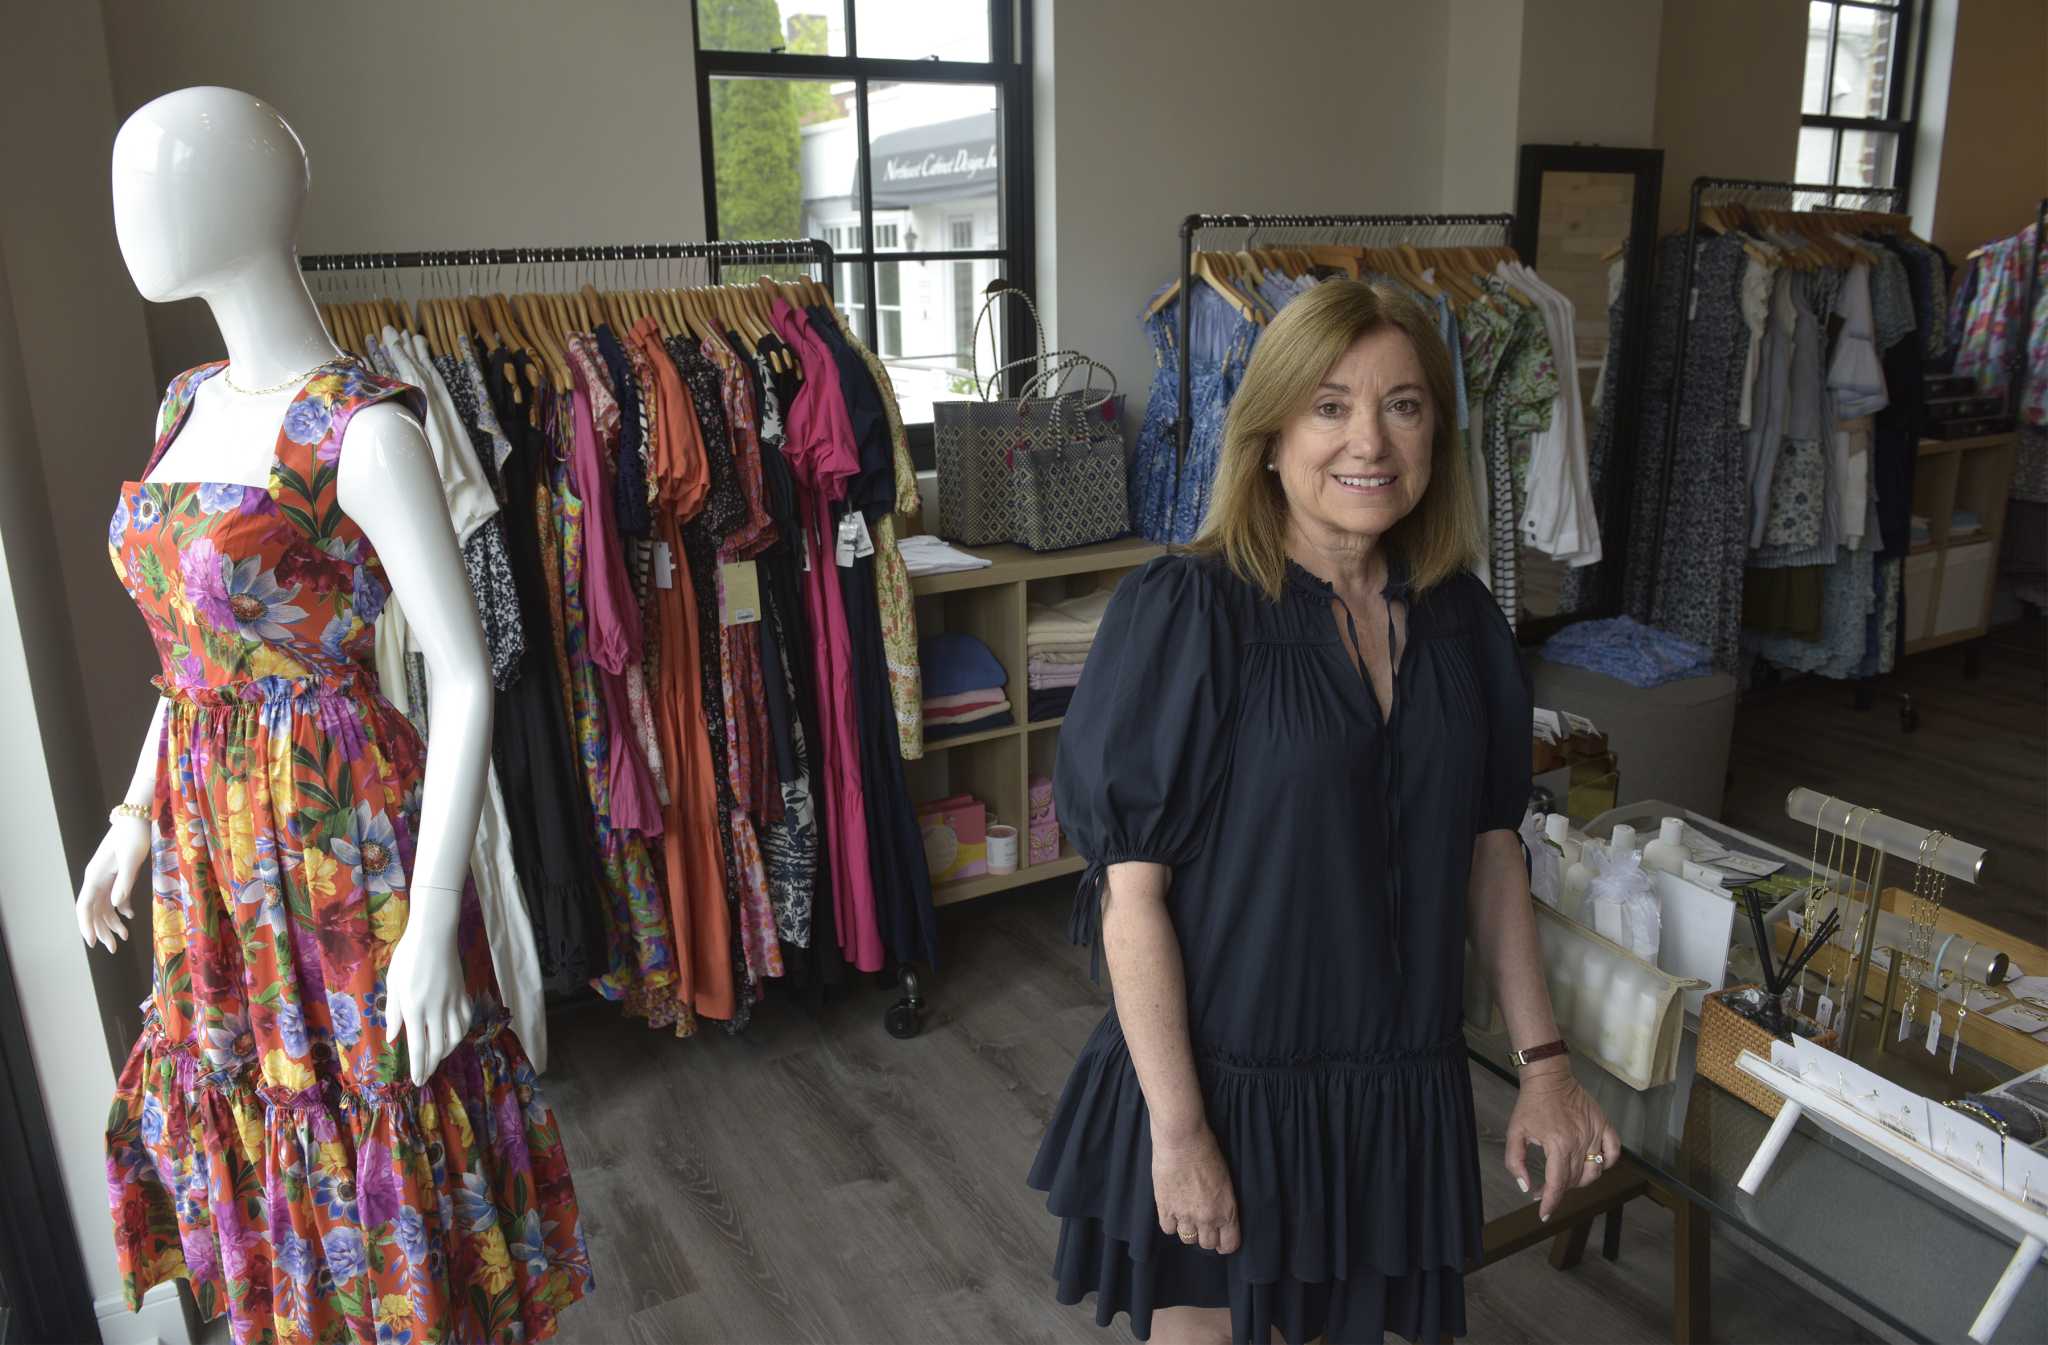 Norwalk women's clothing boutique expands with Ridgefield location